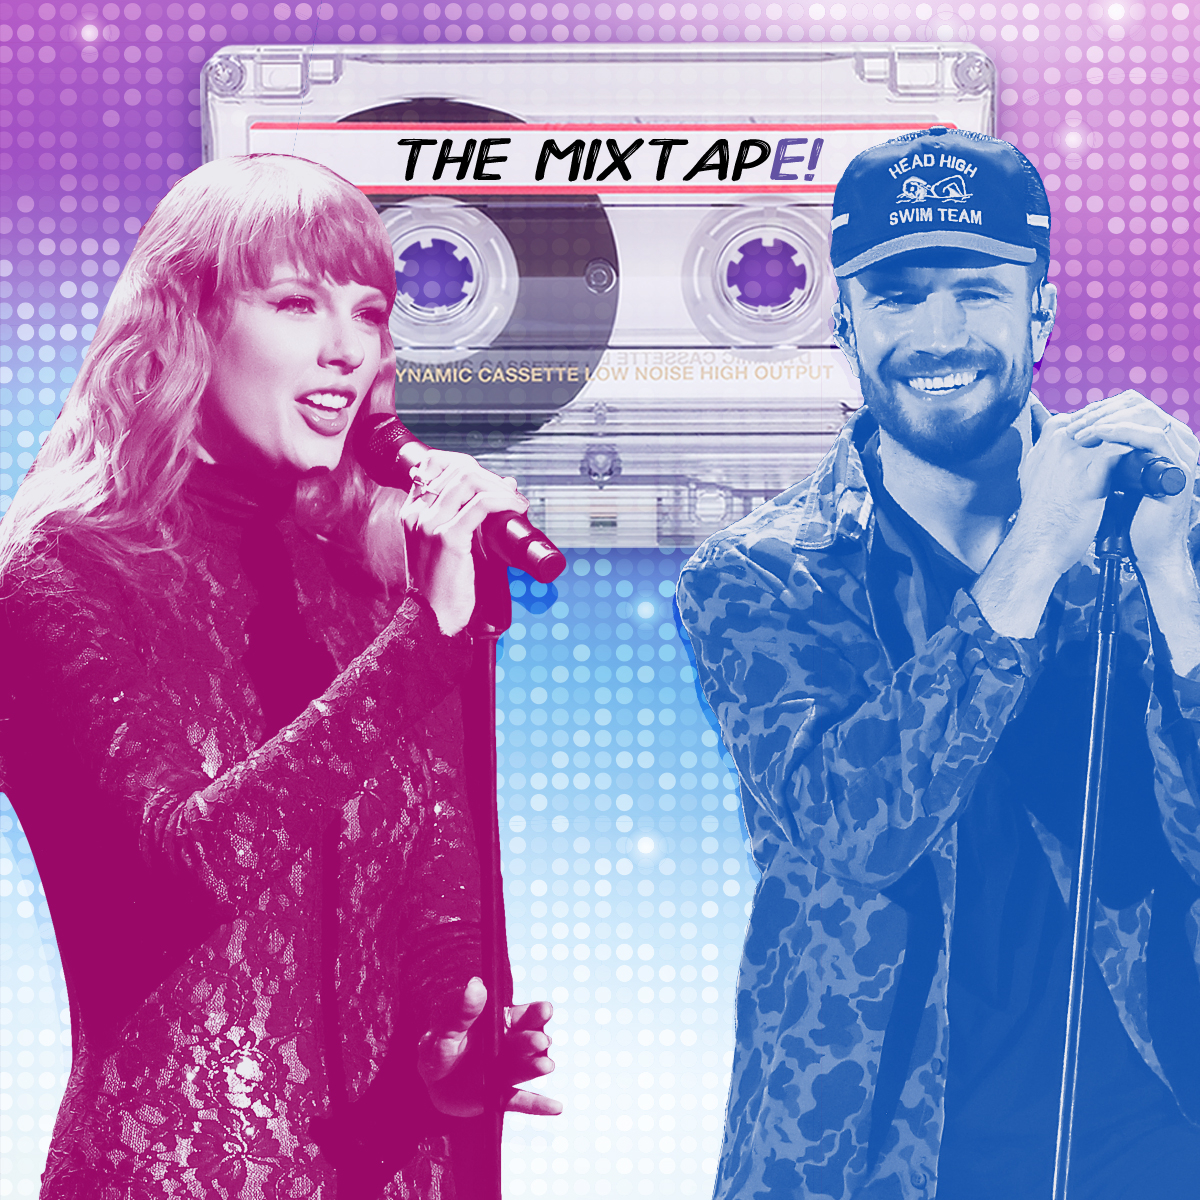 The MixtapE! Presents Taylor Swift, Charlie Puth, Jung Kook, Sam Hunt and More New Music Musts